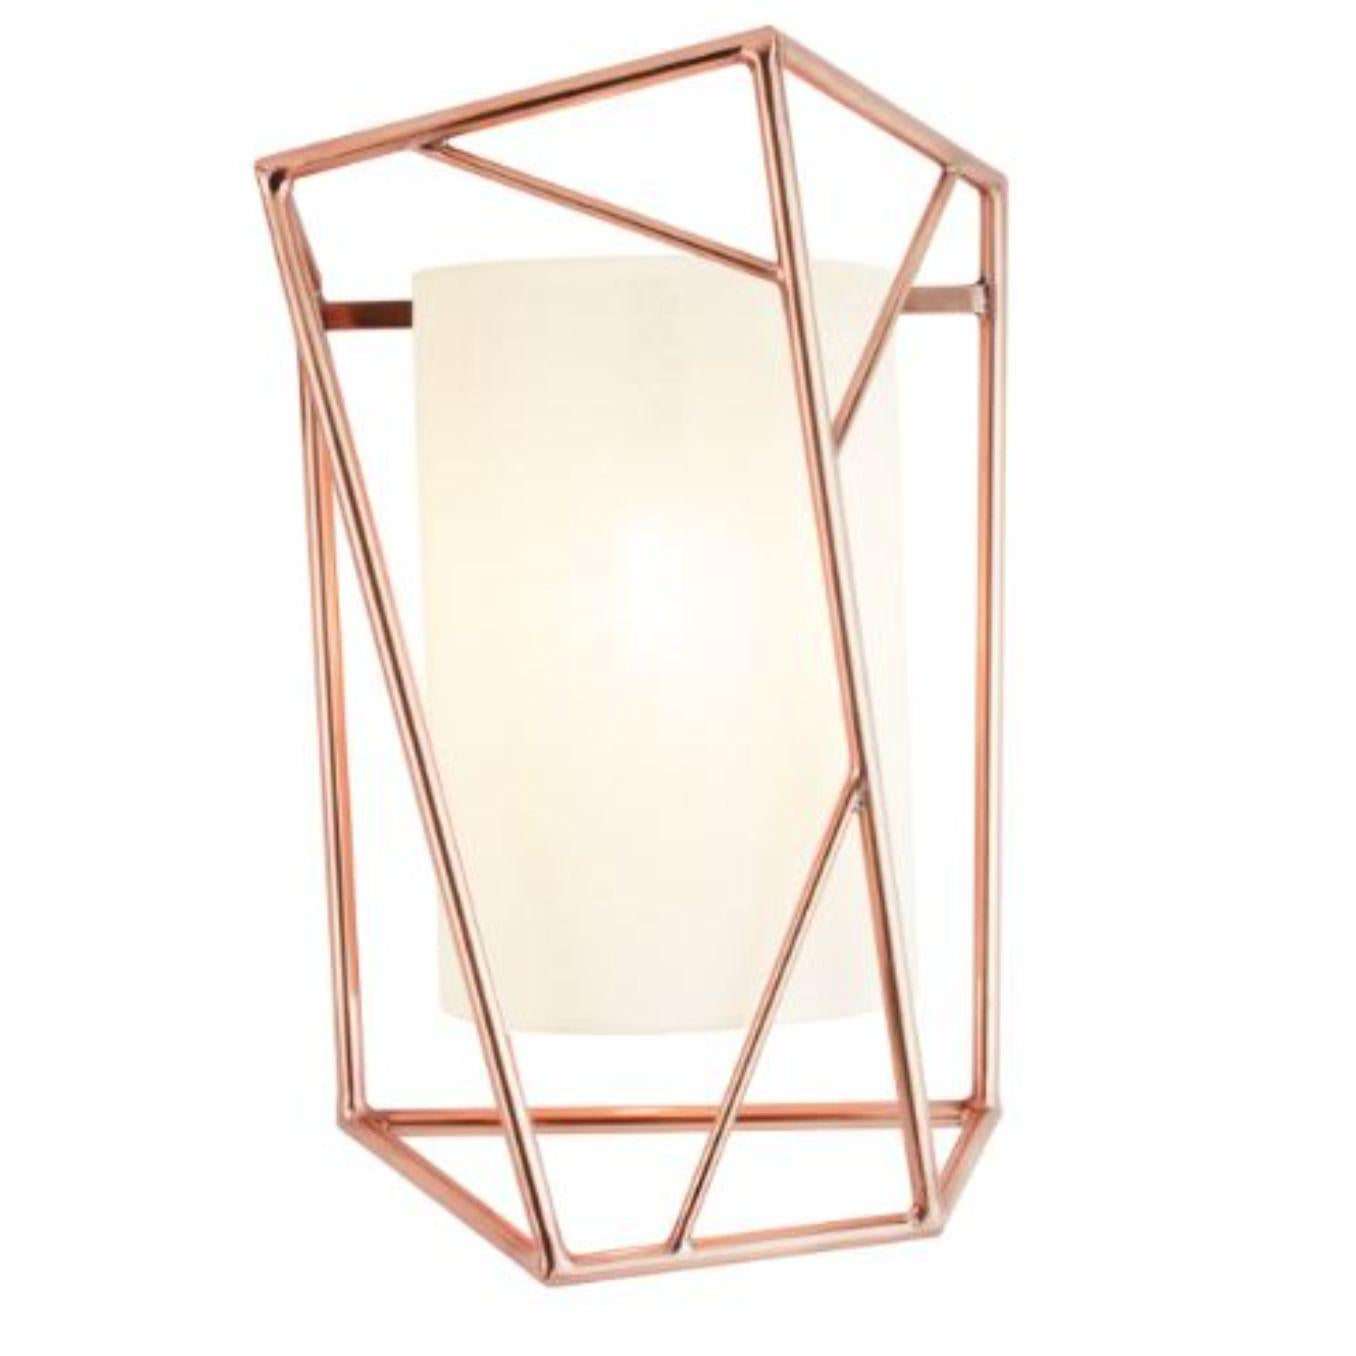 Copper star wall lamp by Dooq.
Dimensions: W 28 x D 20 x H 51 cm
Materials: lacquered metal, polished or satin metal, copper.
abat-jour: linen
Also available in different colors and materials.

Information:
230V/50Hz
E14/1x15W